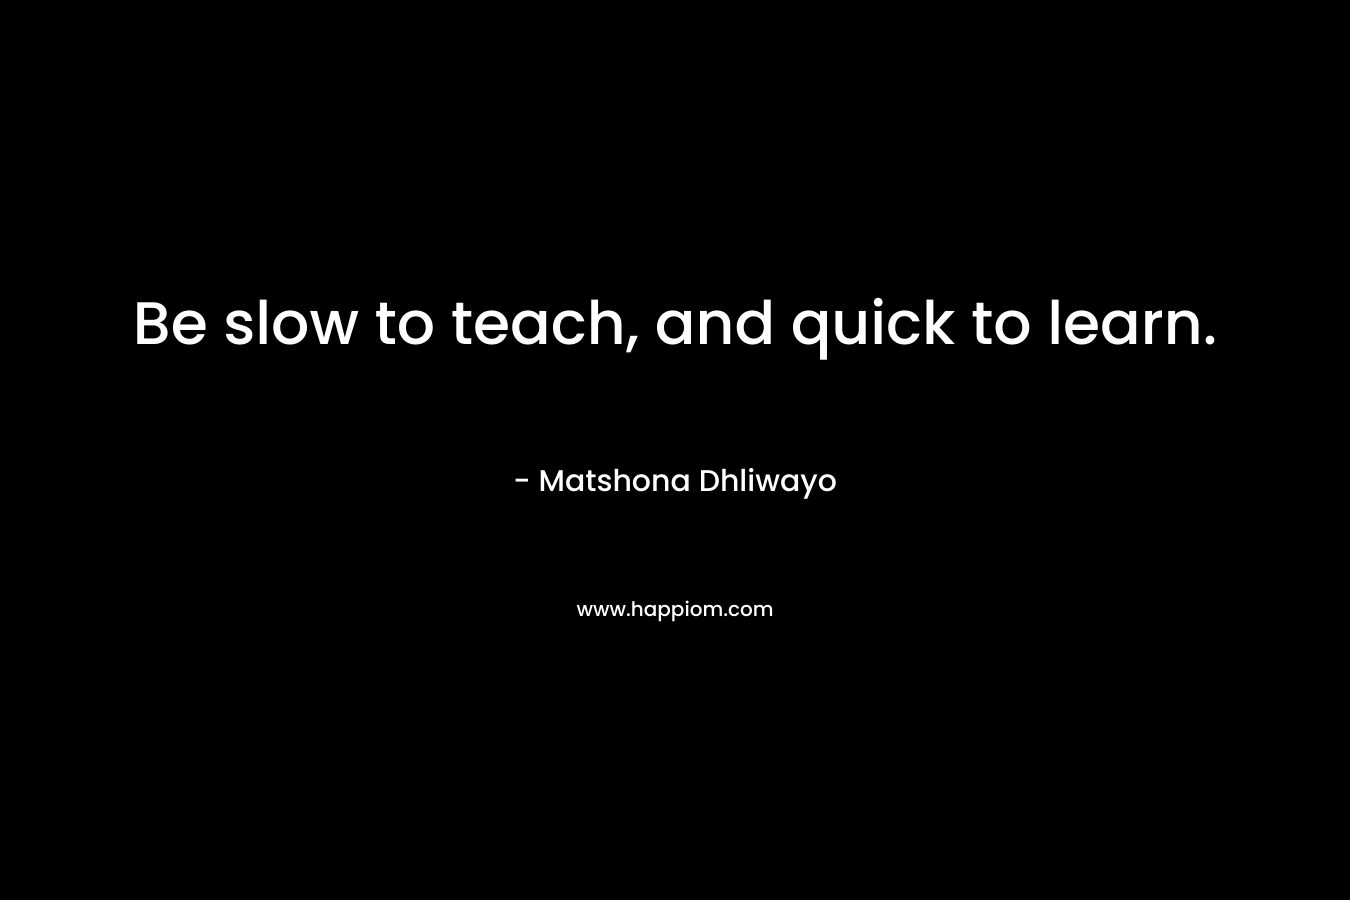 Be slow to teach, and quick to learn.